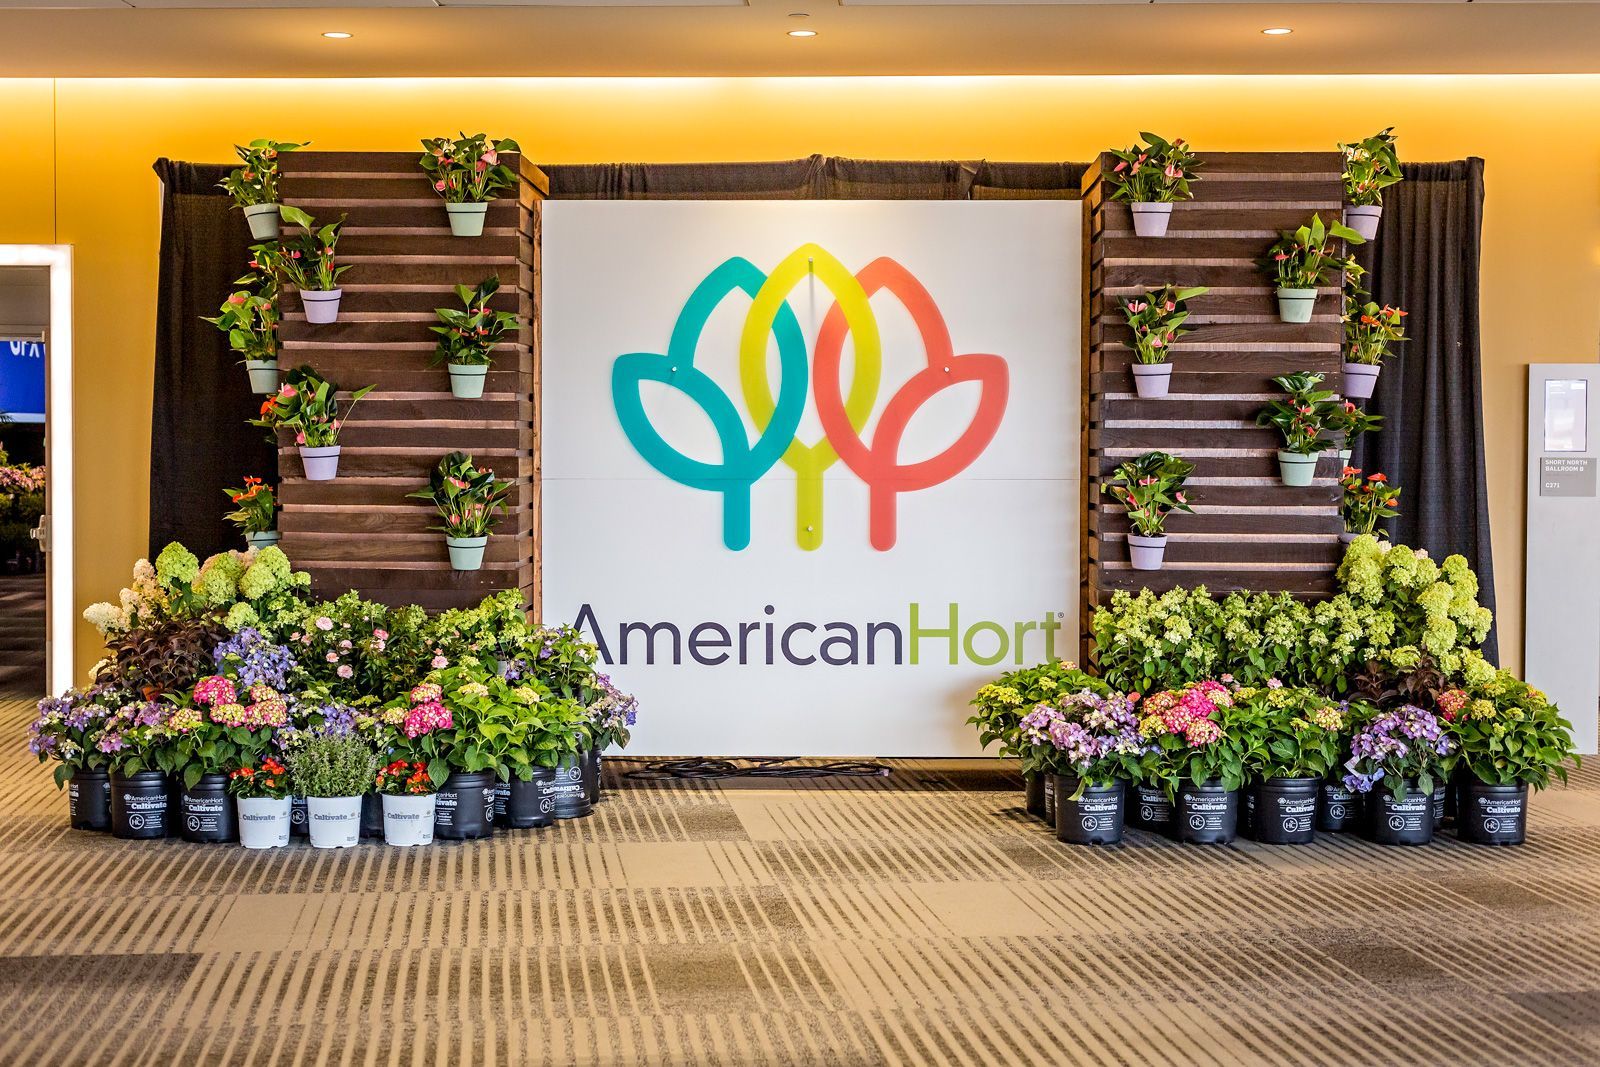 a display of potted plants and a sign that says AmericanHort